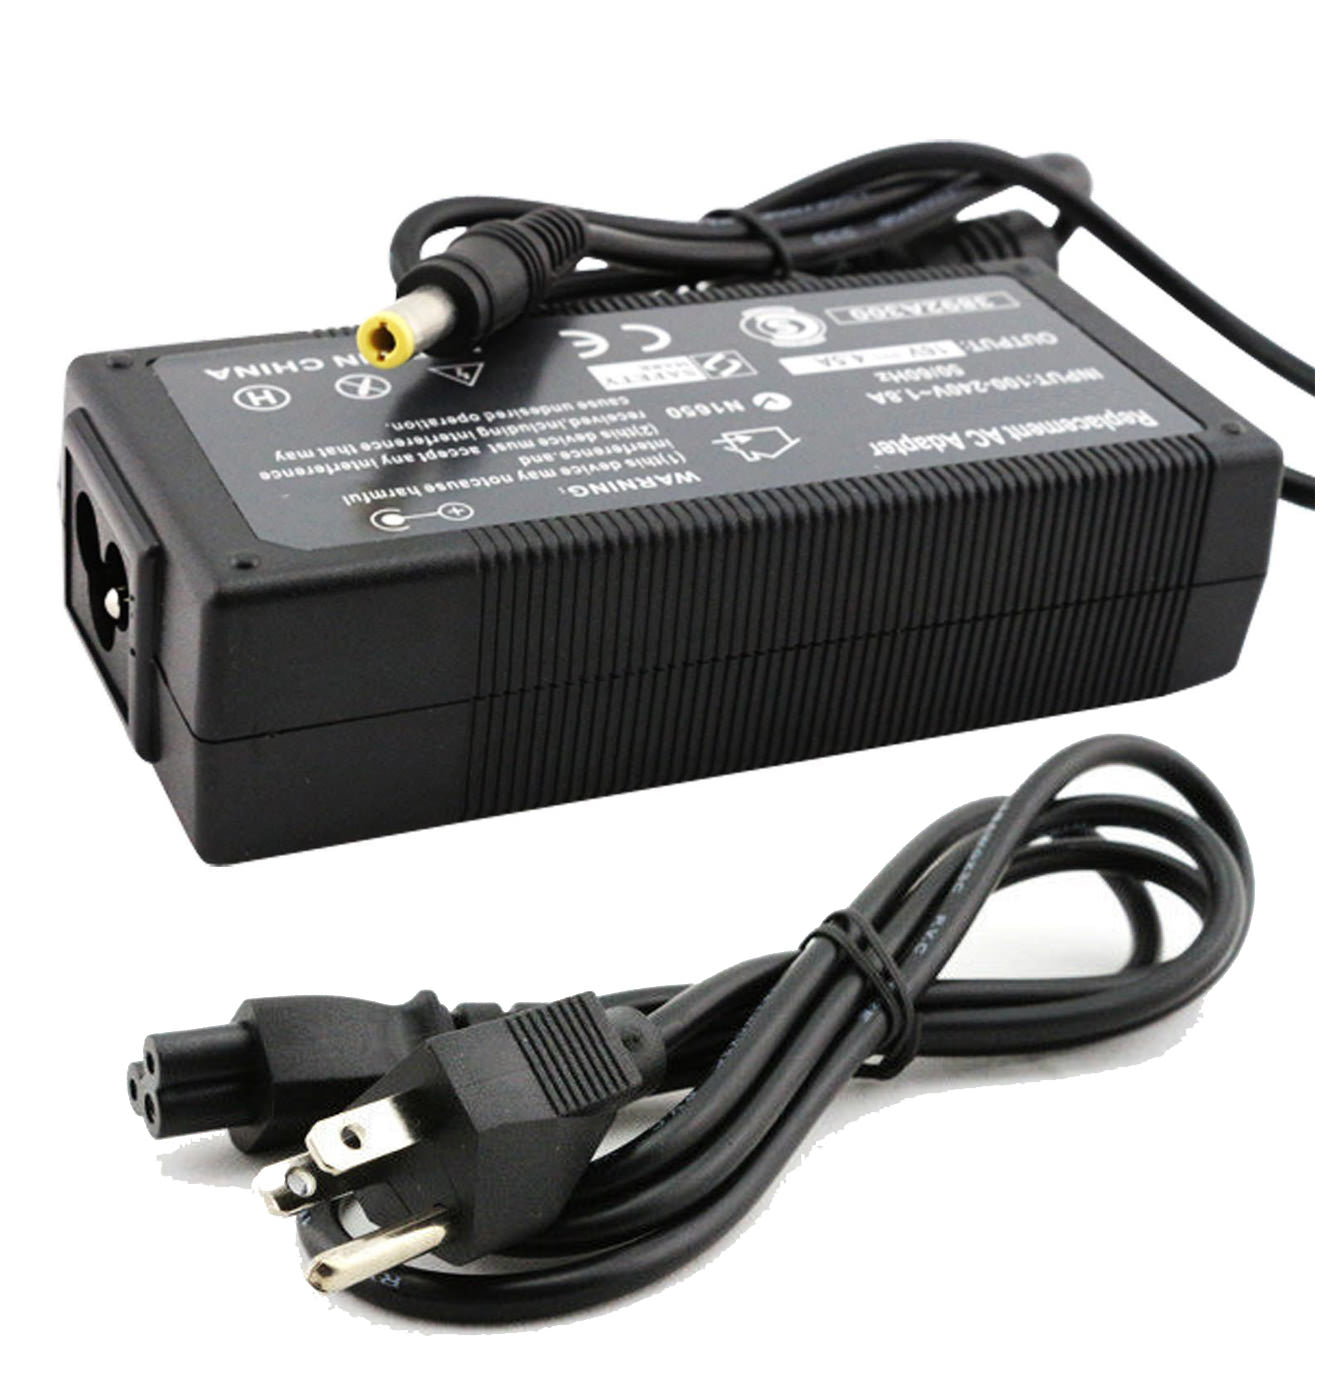 AC Adapter Charger for IBM ThinkPad X41 Notebook.